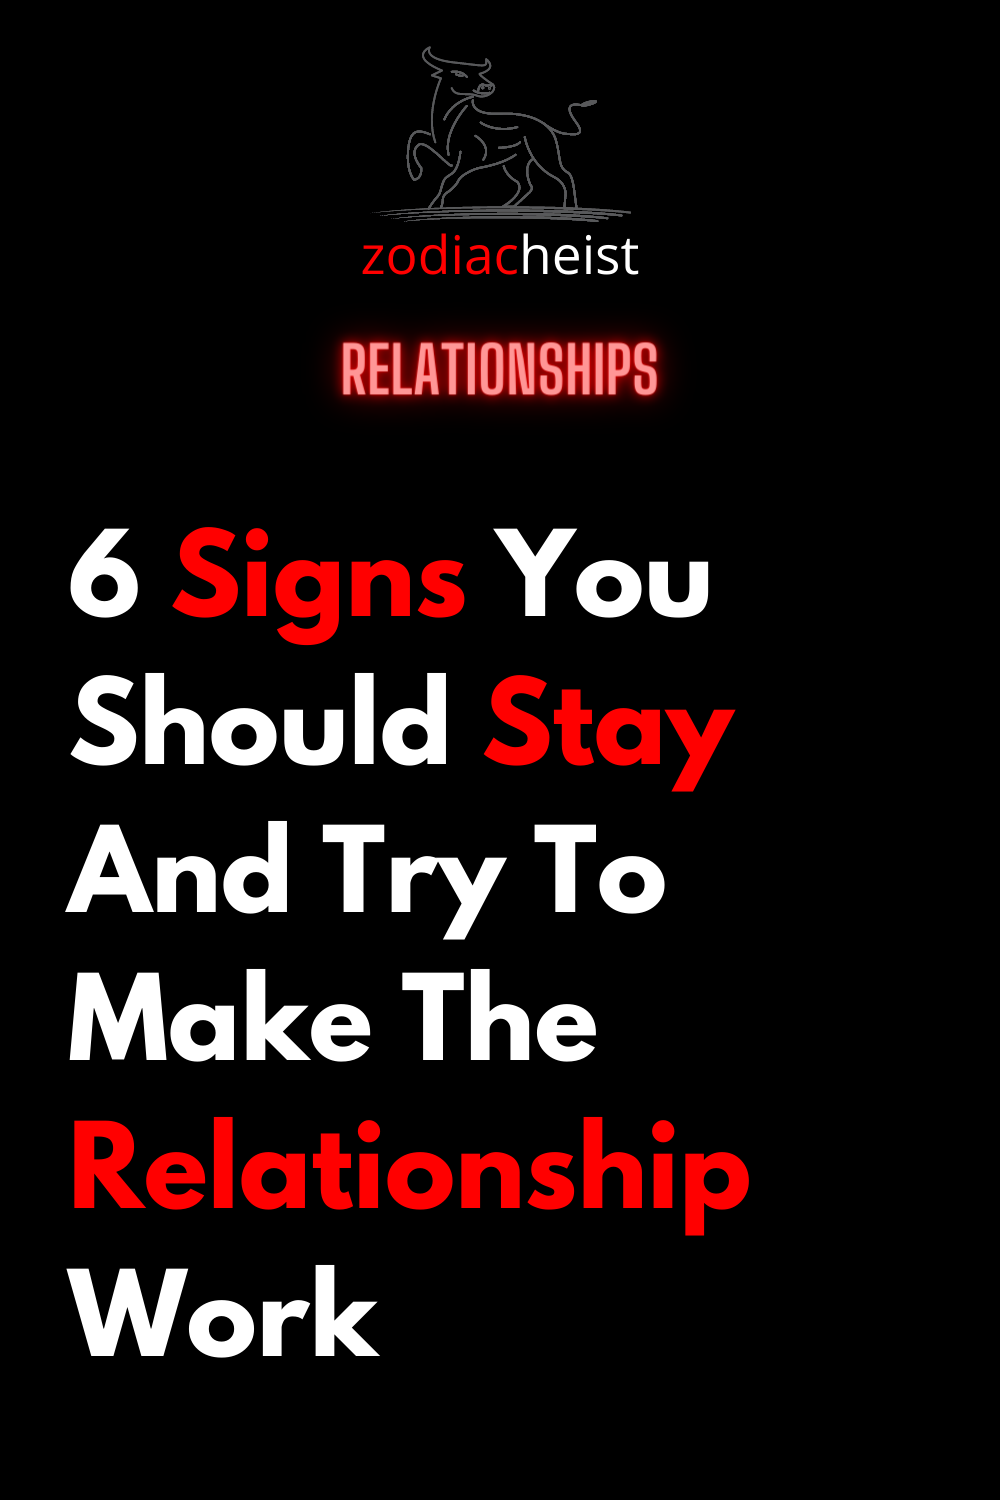 6 Signs You Should Stay And Try To Make The Relationship Work